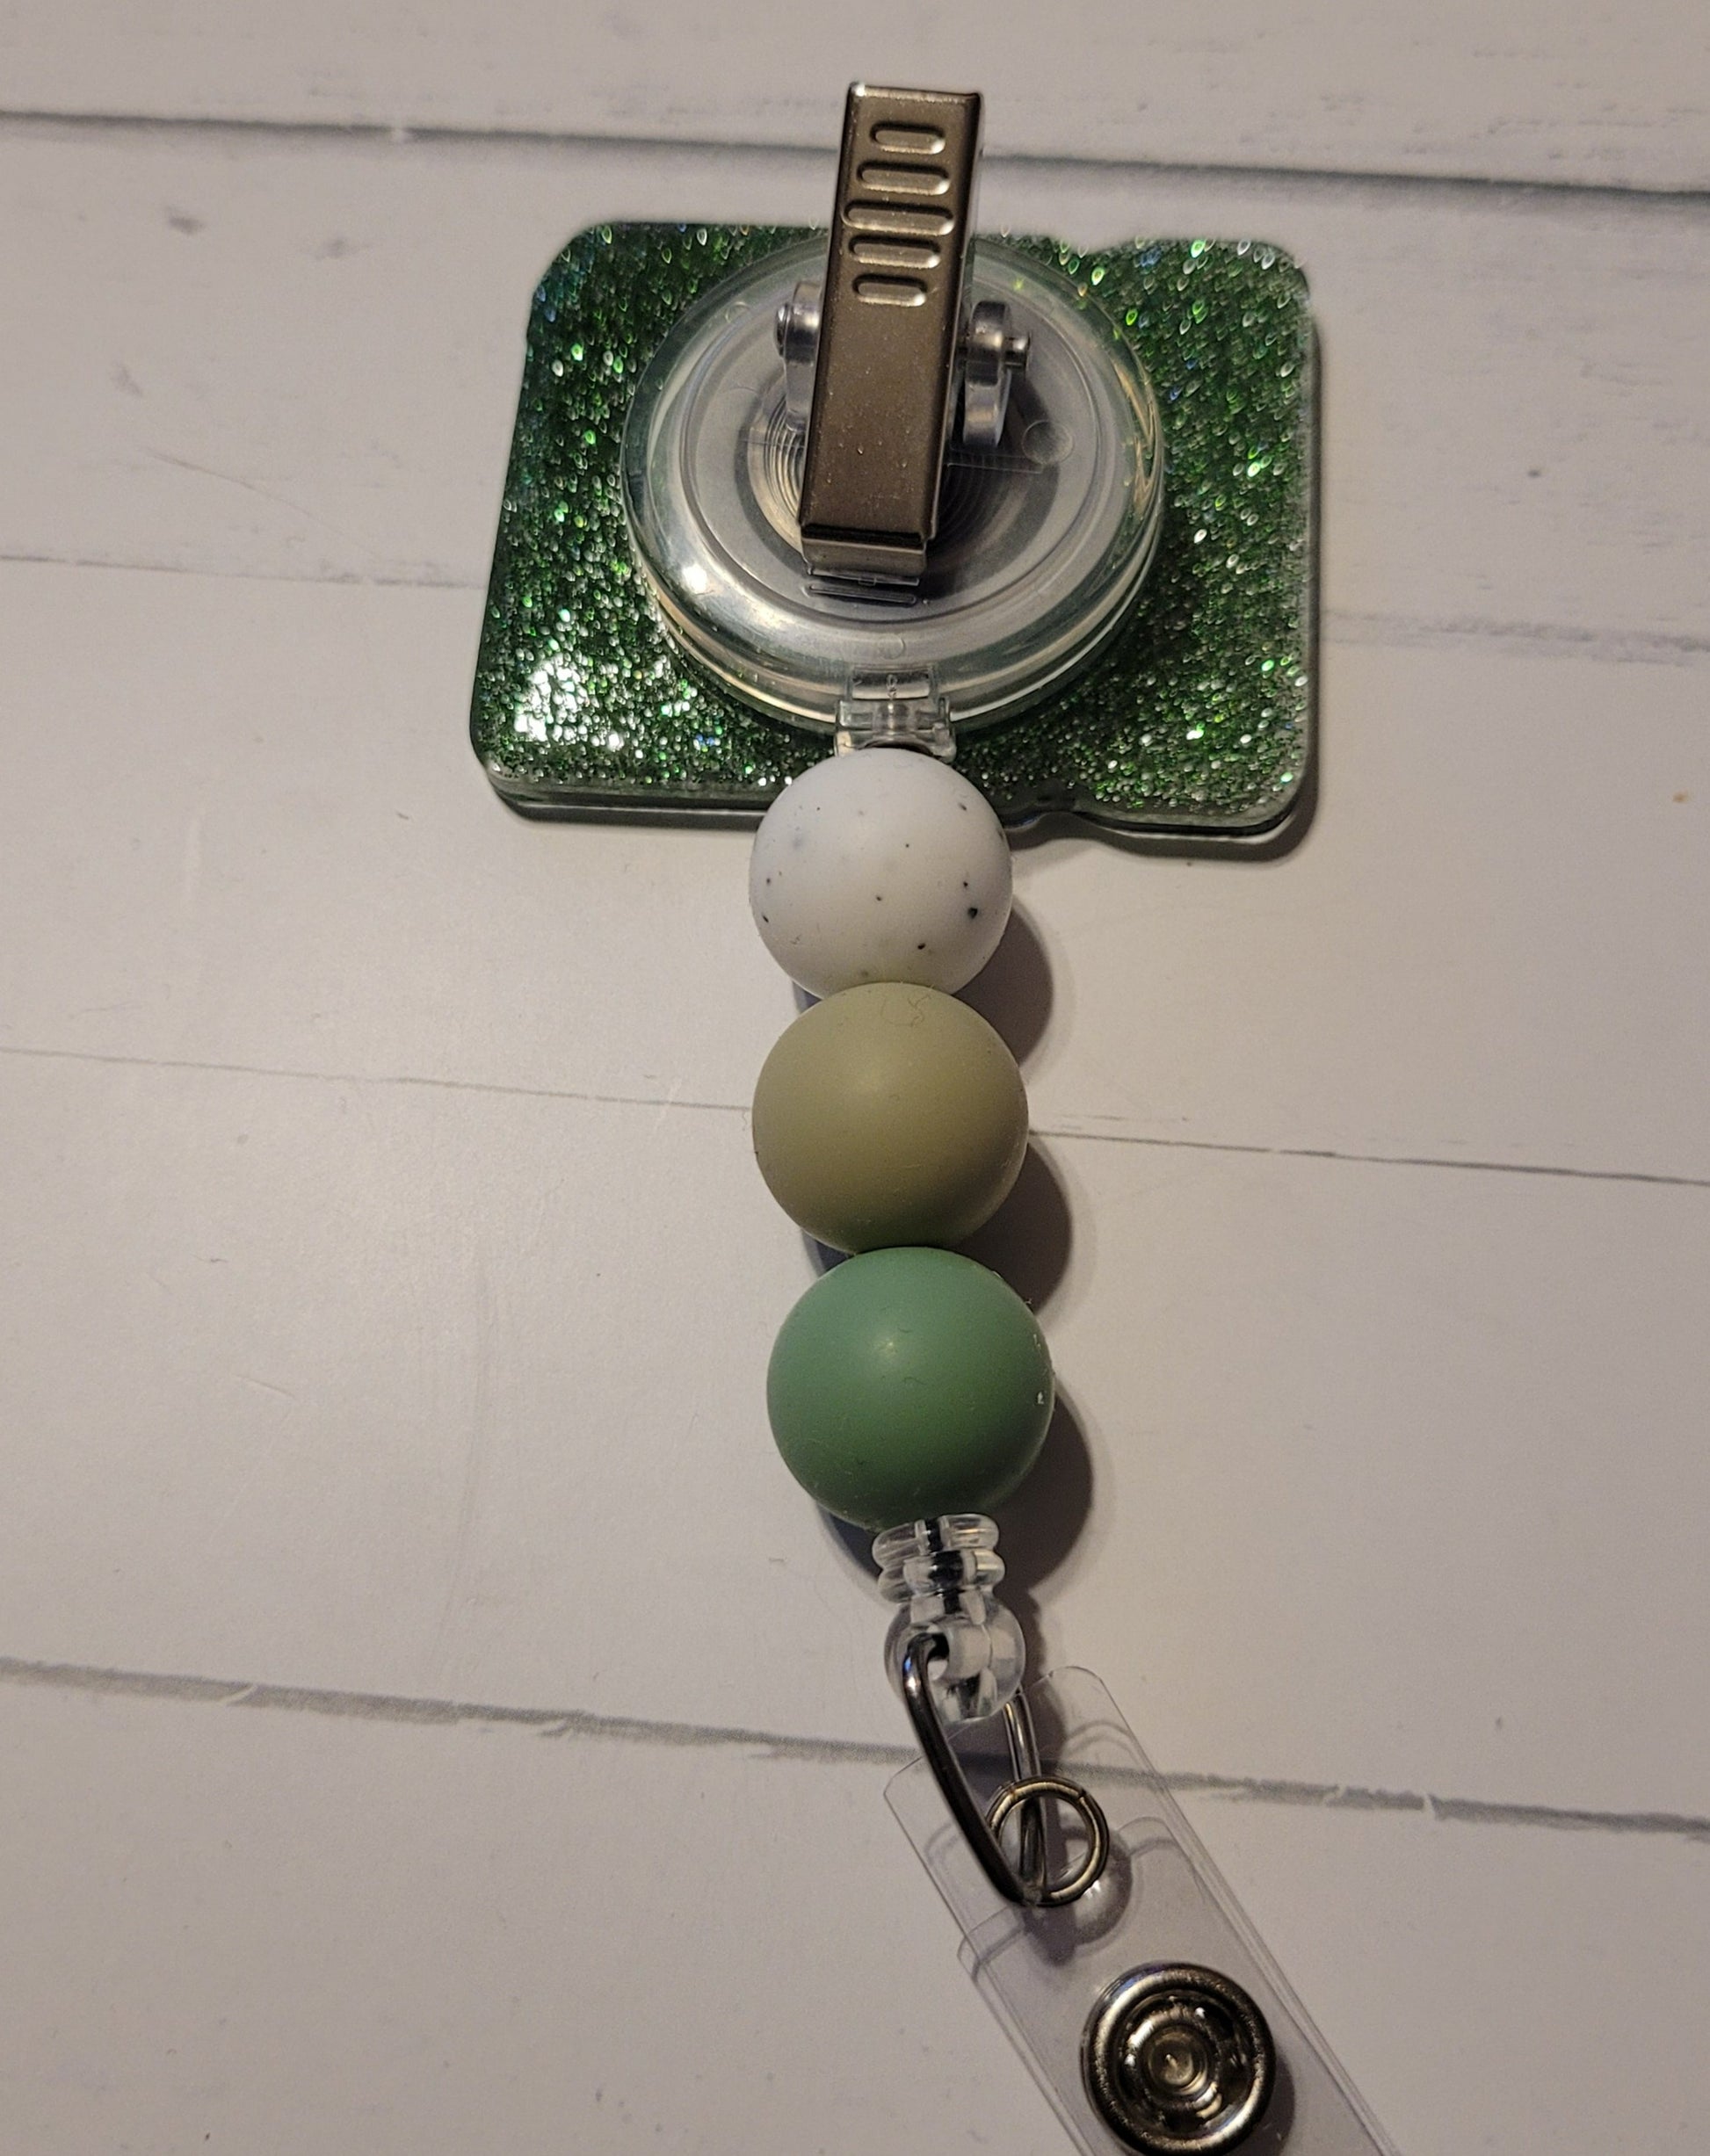 This badge reel promotes self-expression with the message "Be You." The bold lettering in various shades of green pops against a glittery green background. It also features three coordinating silicone beads for added flair.